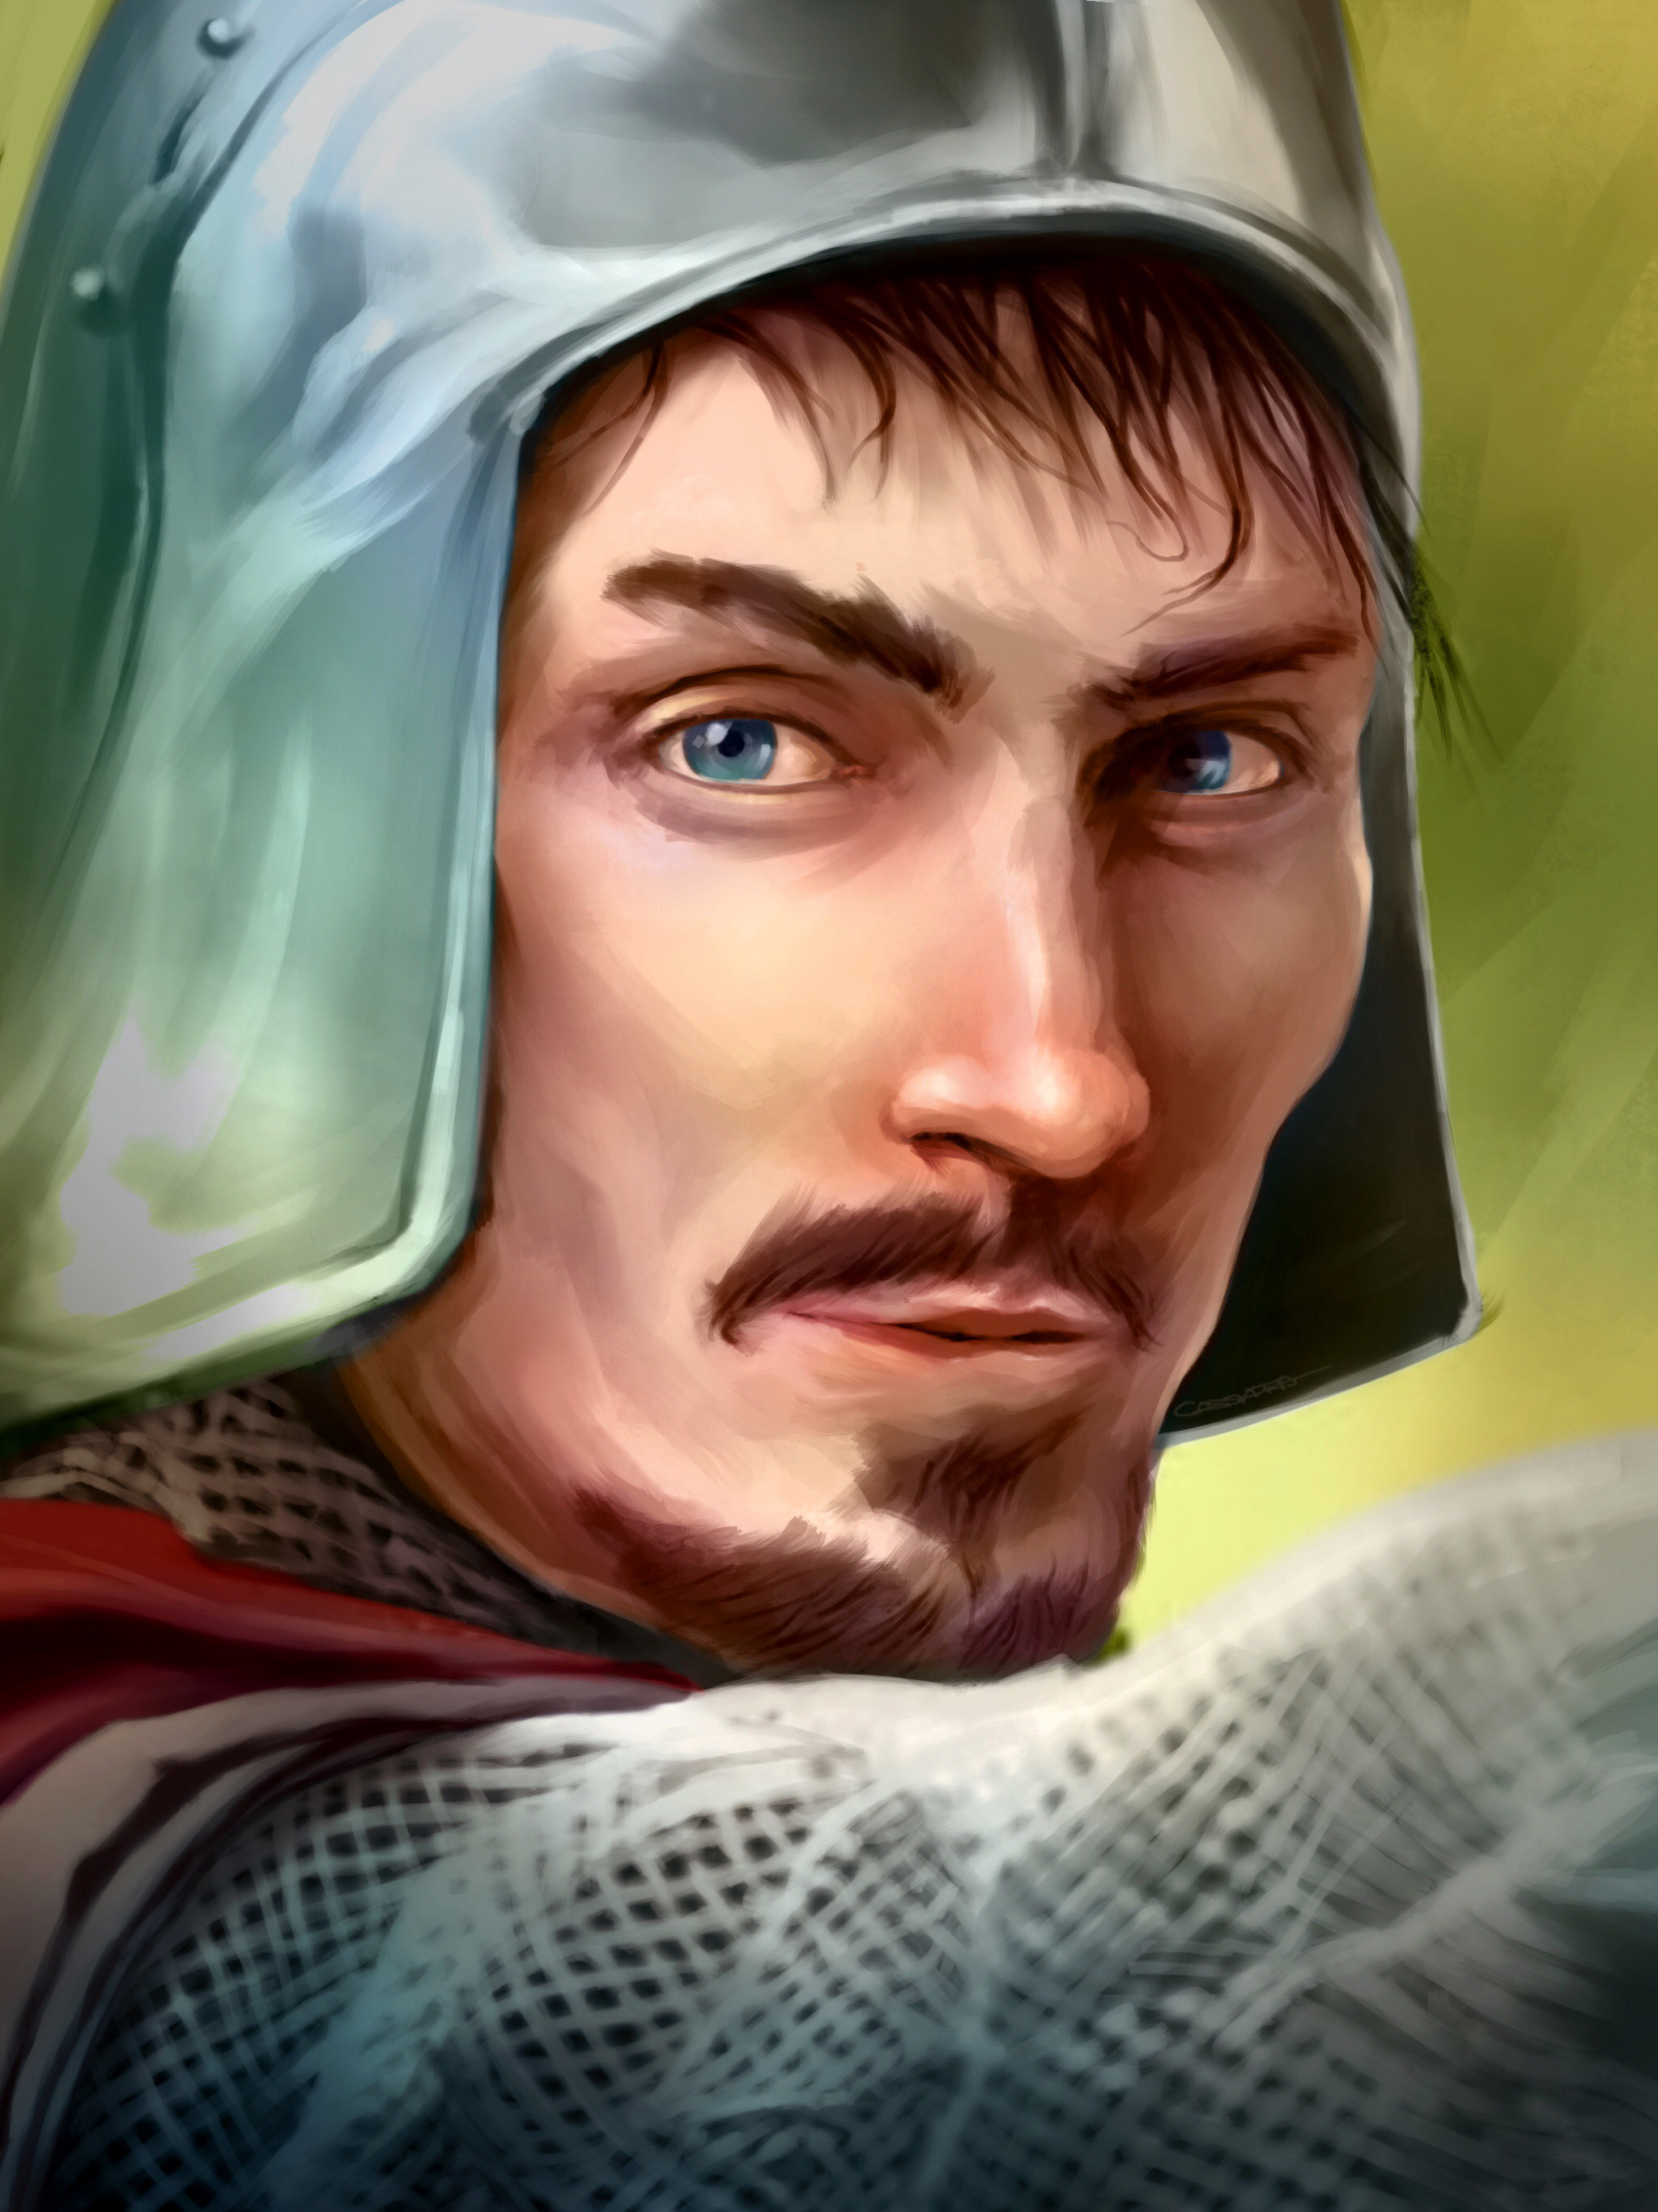 Personal character portrait for the cRPG Pillars of Eternity